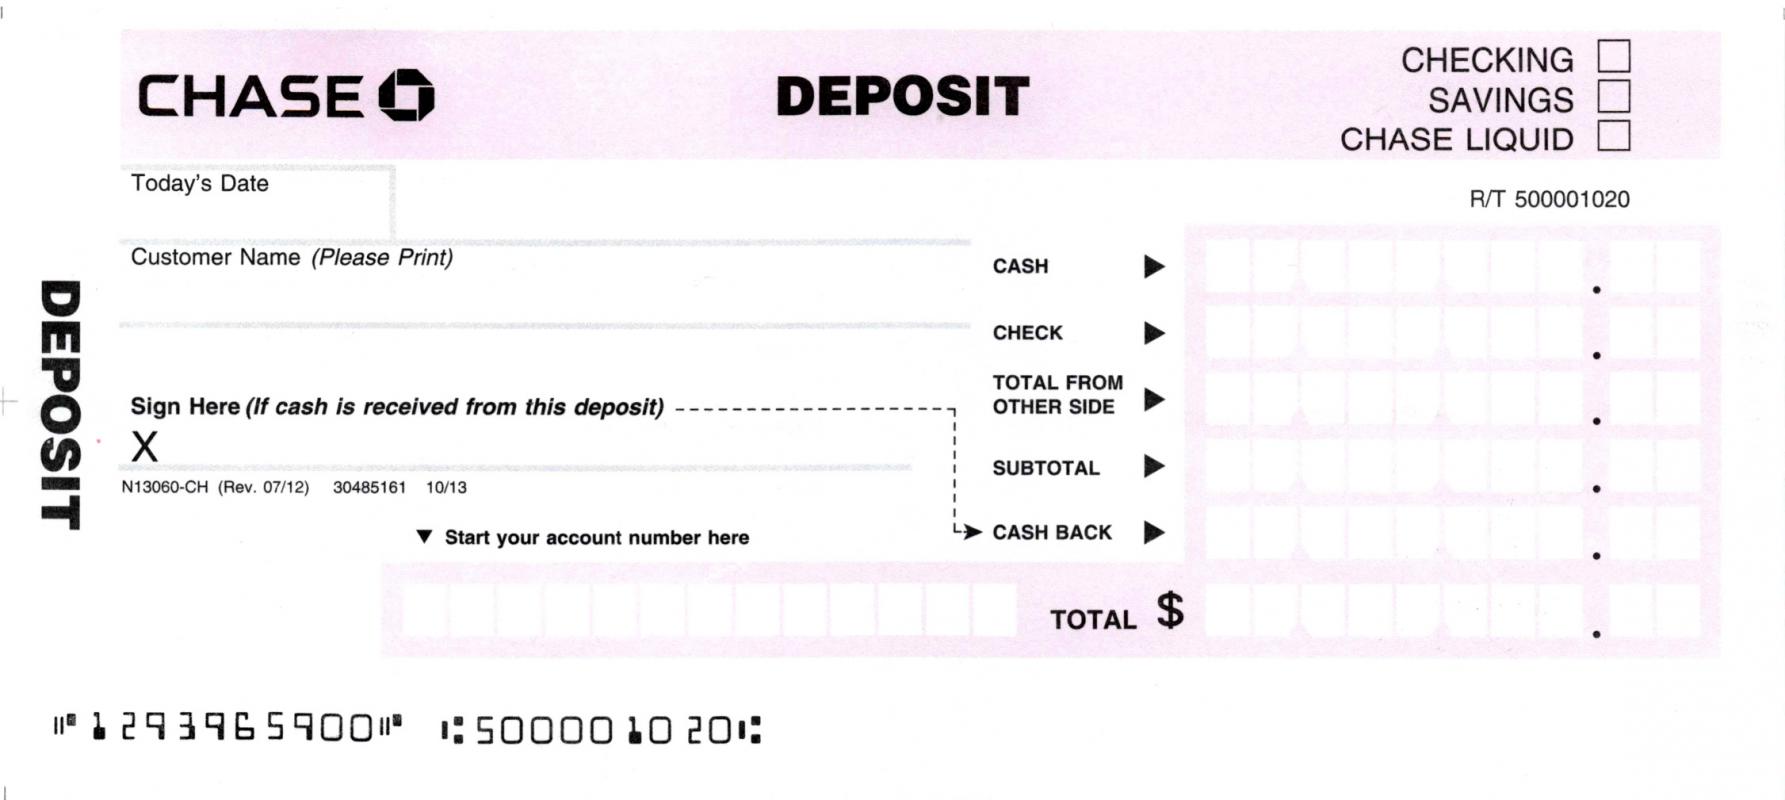 deposit-slips-examples-template-business